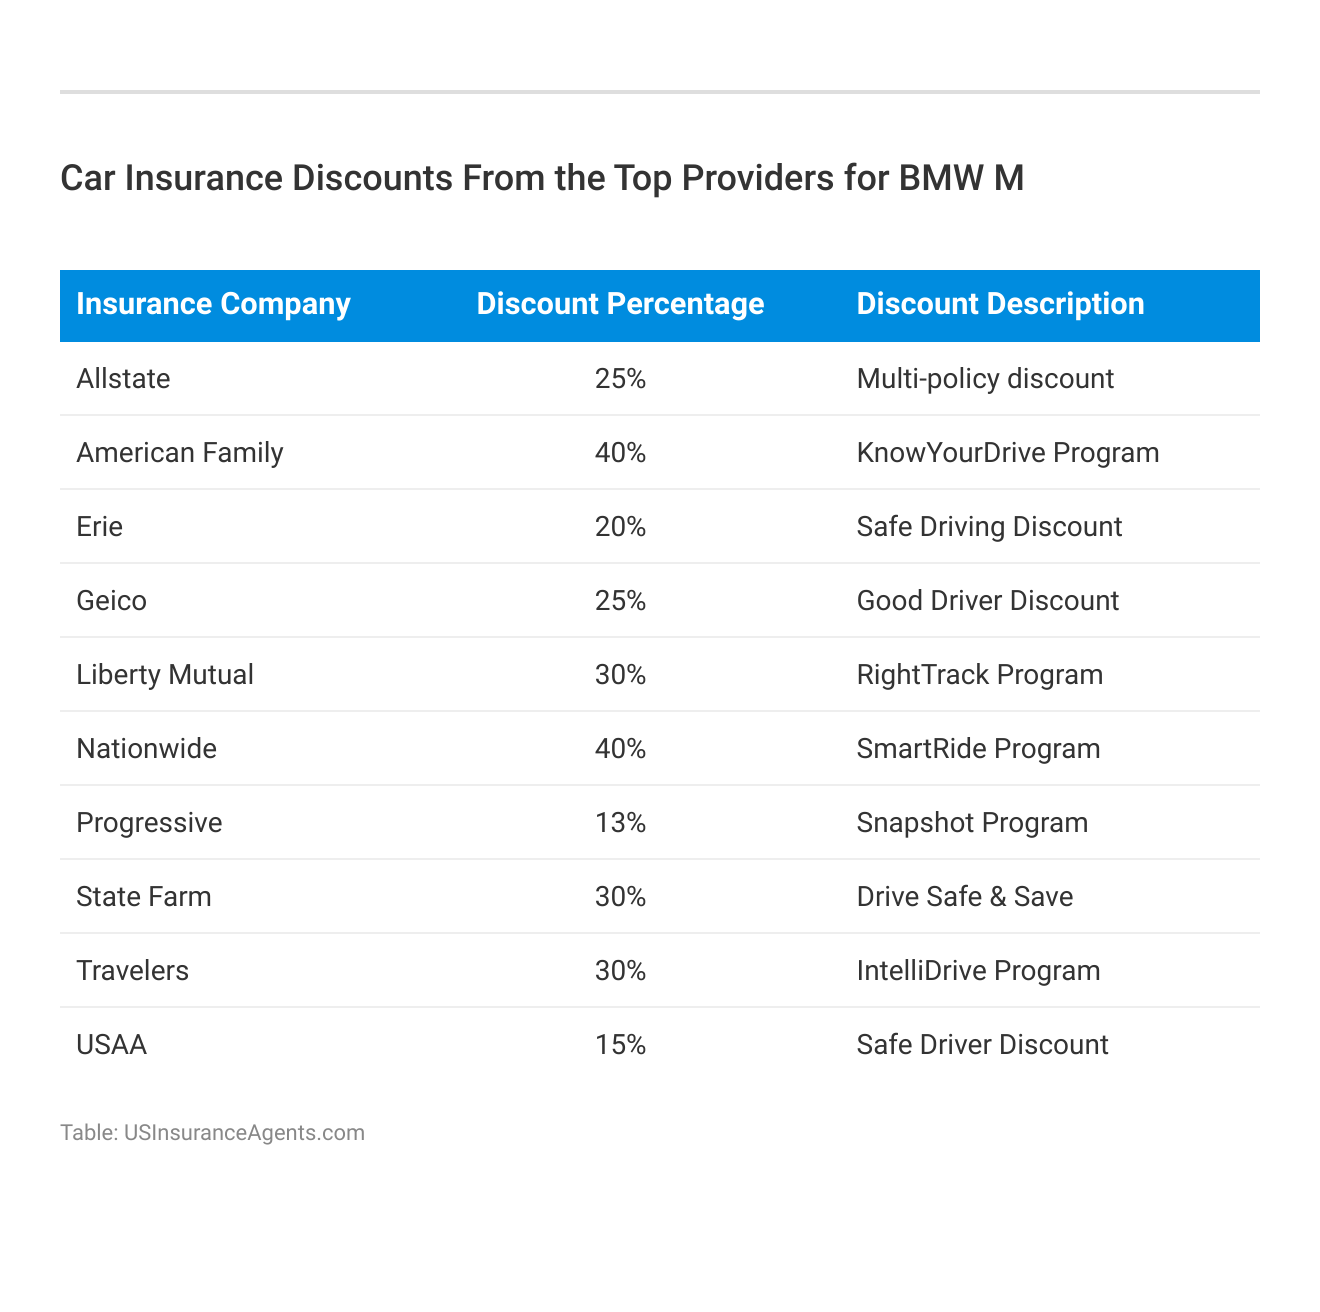 <h3>Car Insurance Discounts From the Top Providers for BMW M</h3>